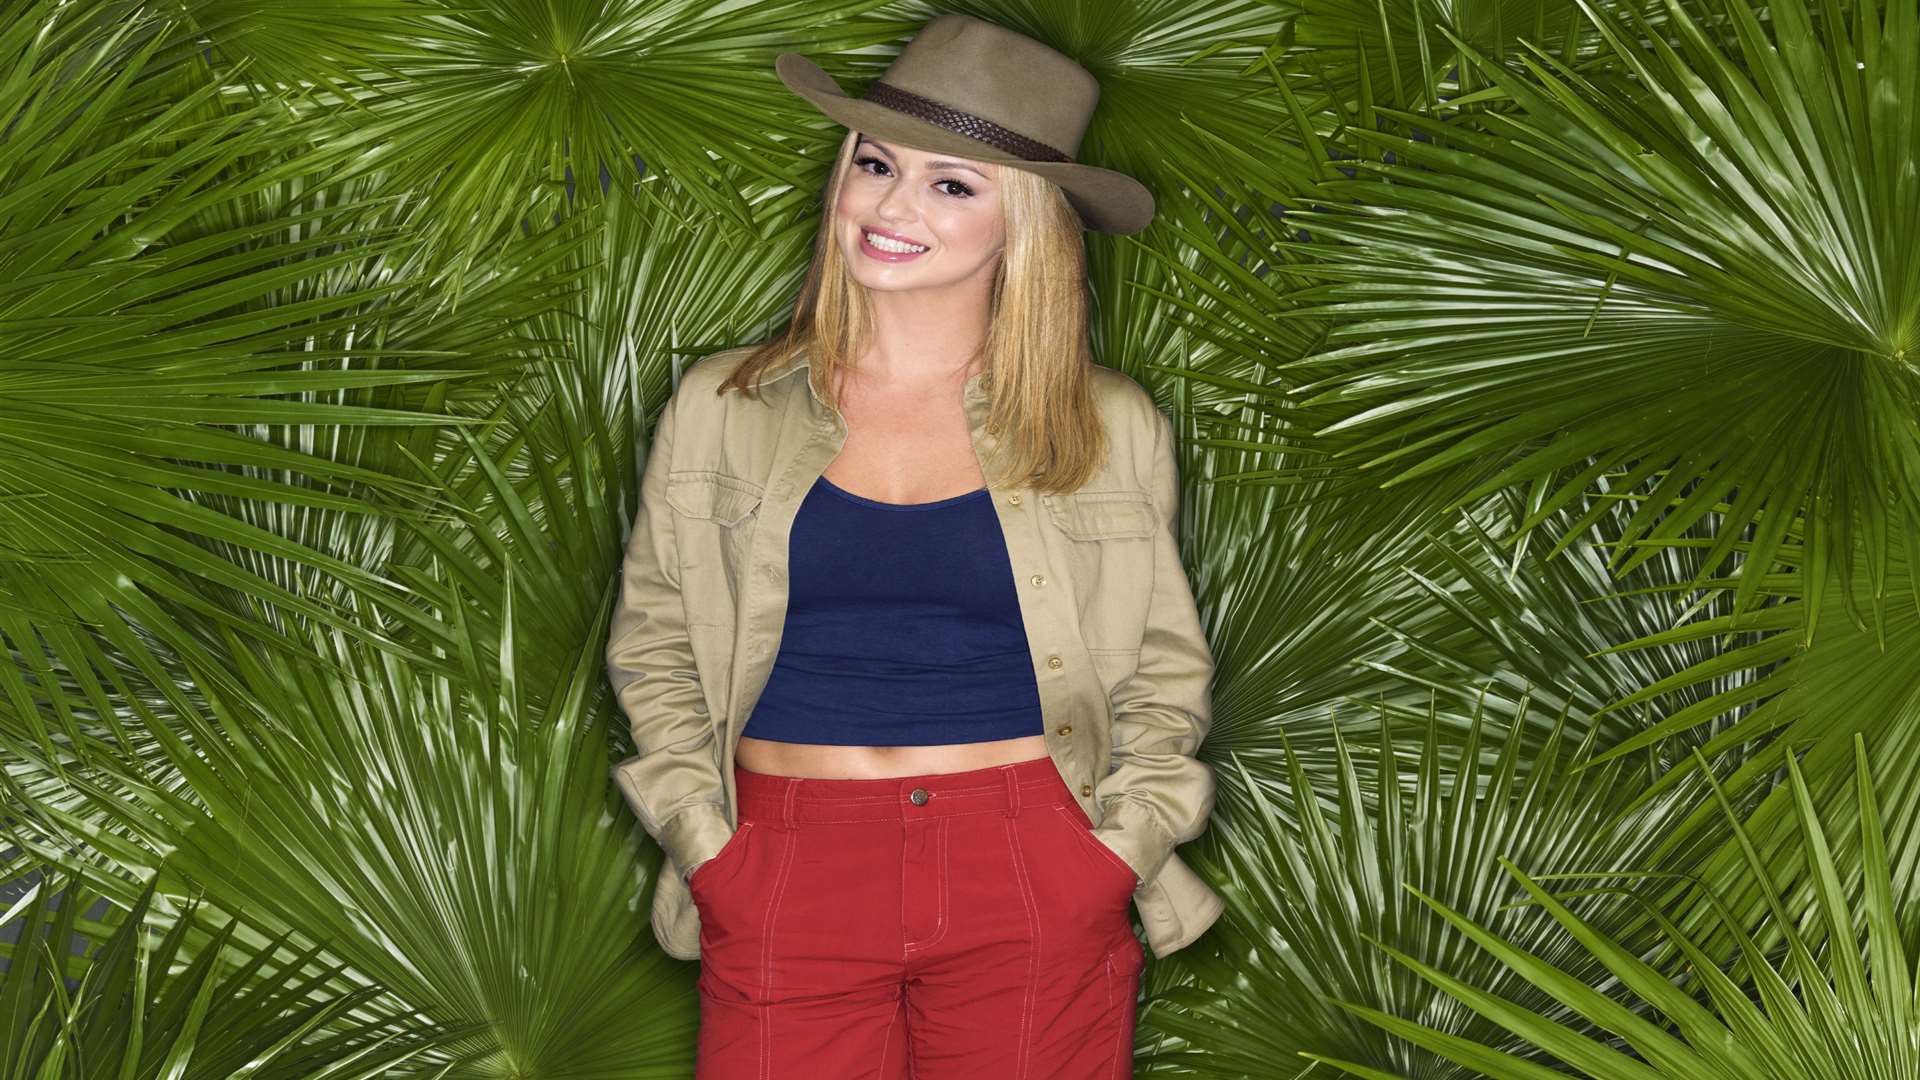 Former Strictly Come Dancing professional Ola Jordan was the third celeb to be evicted from the jungle